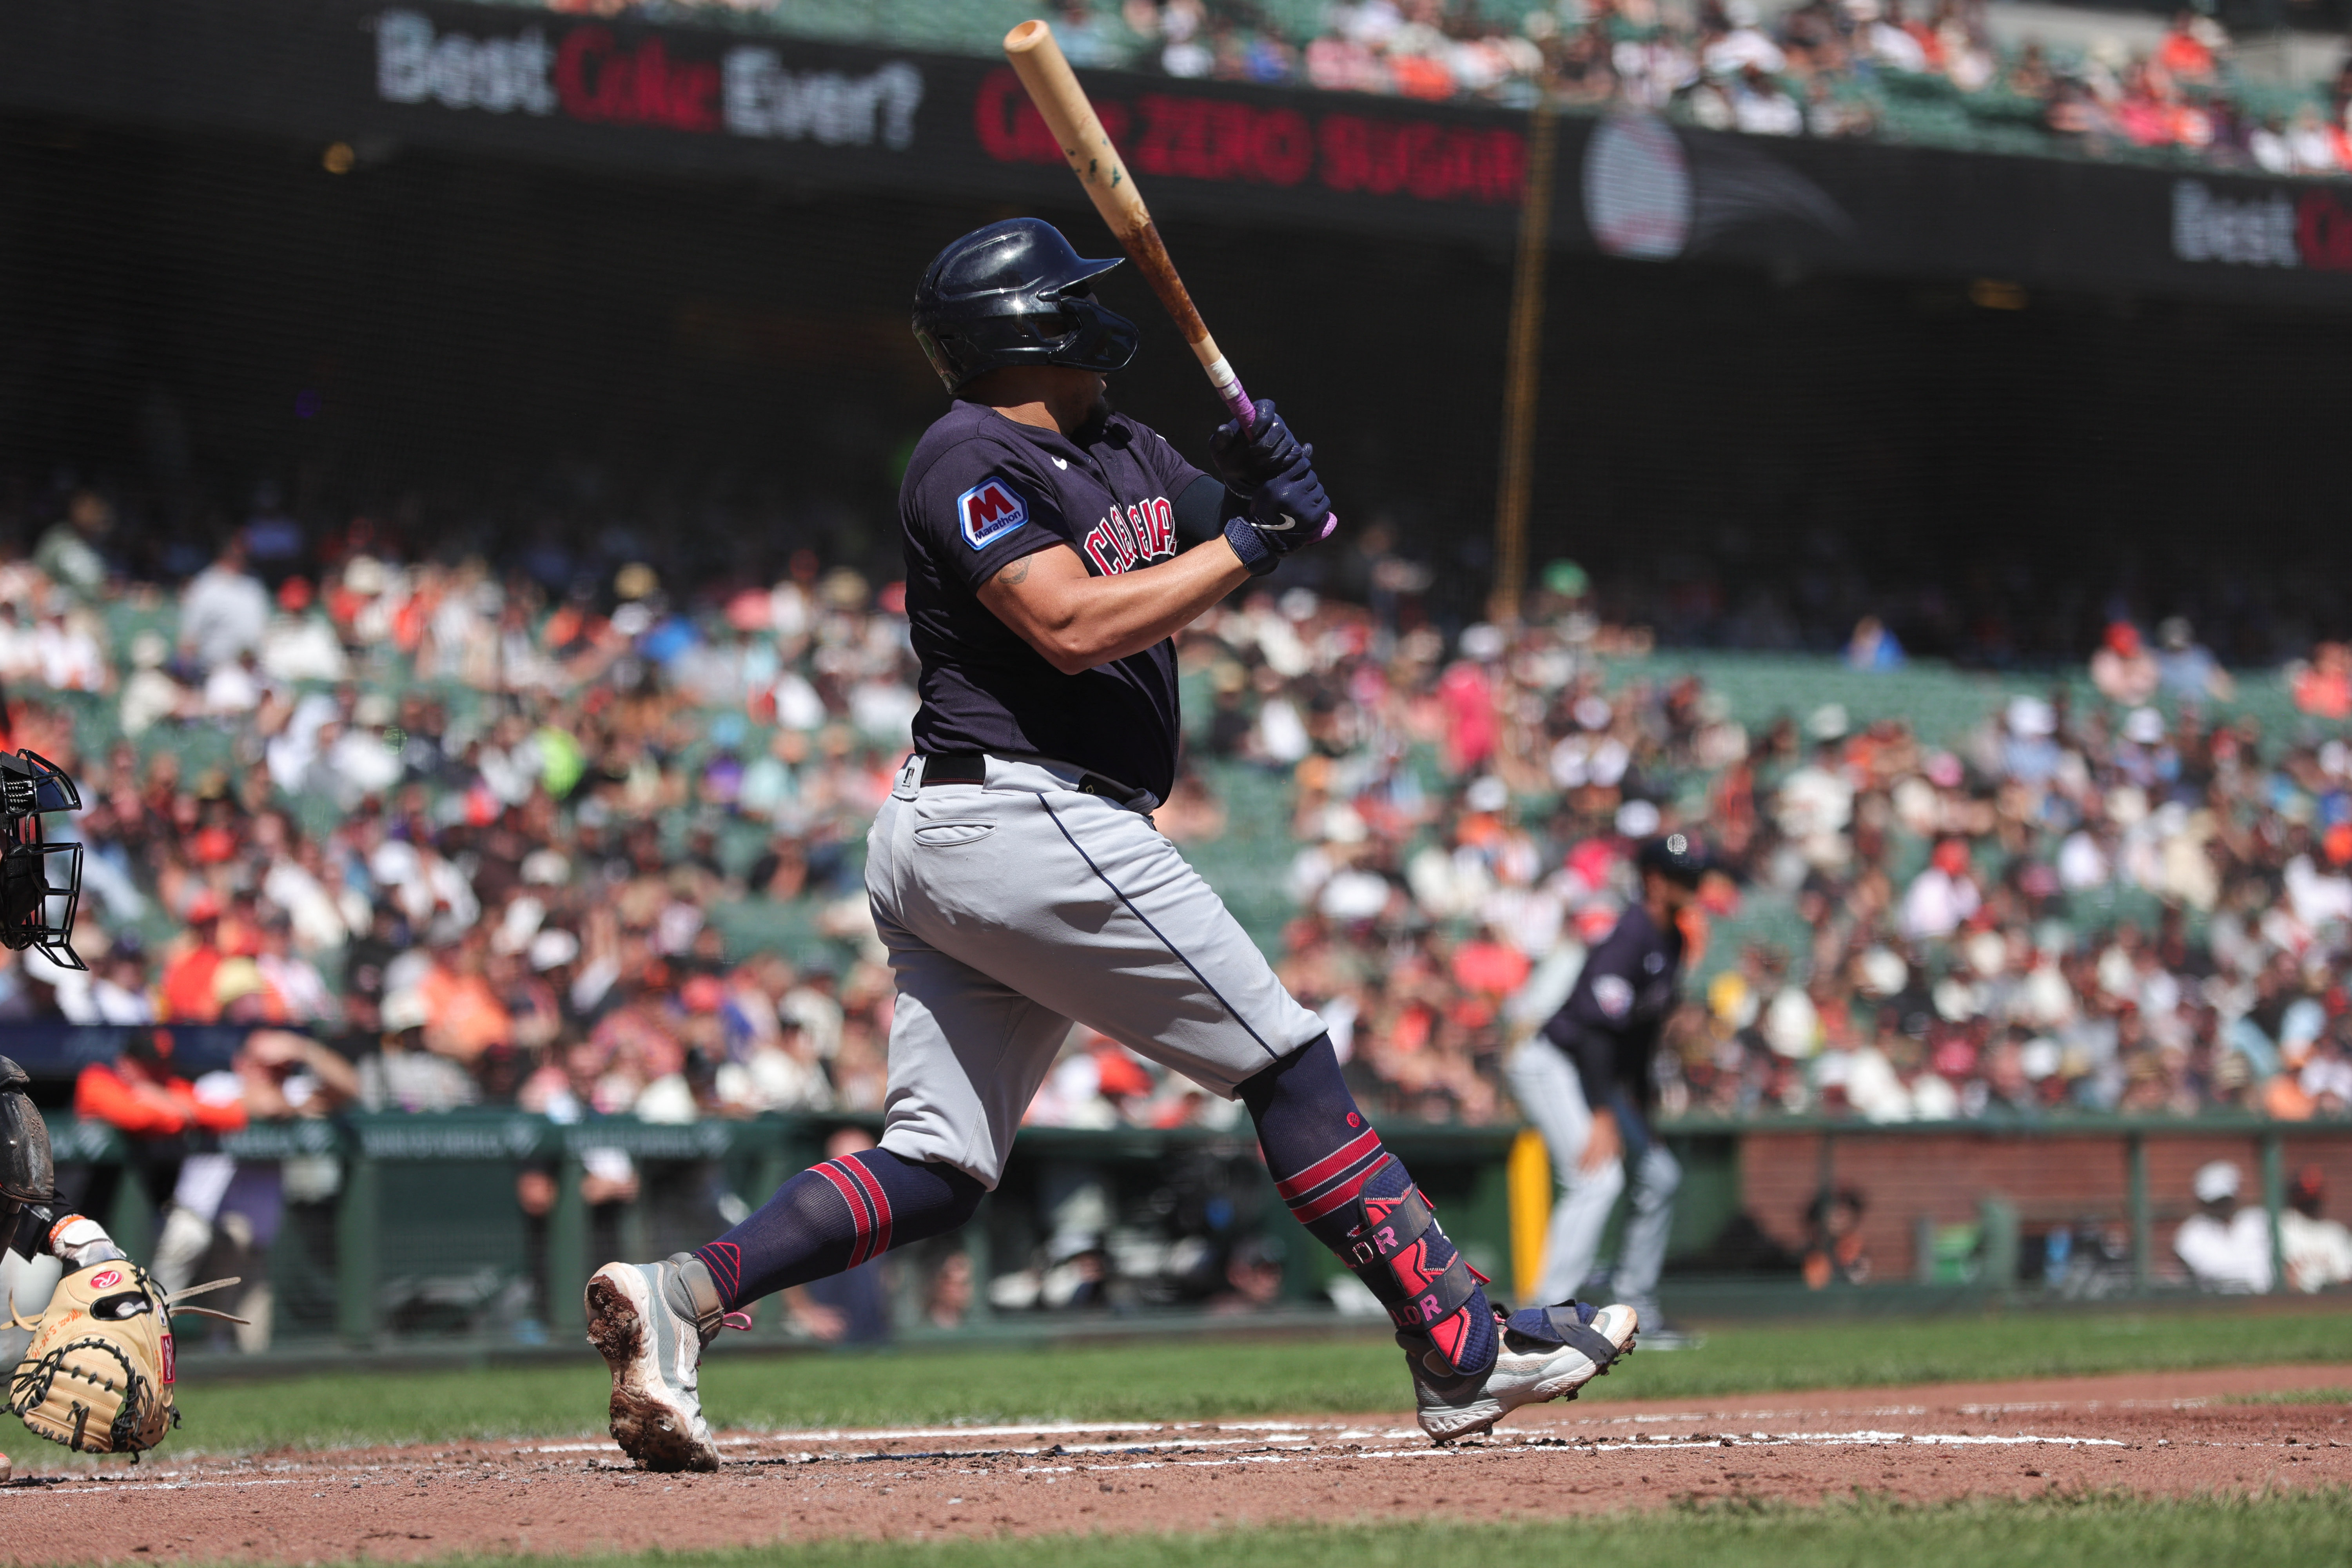 Giants rally late, edge Guardians in 10th